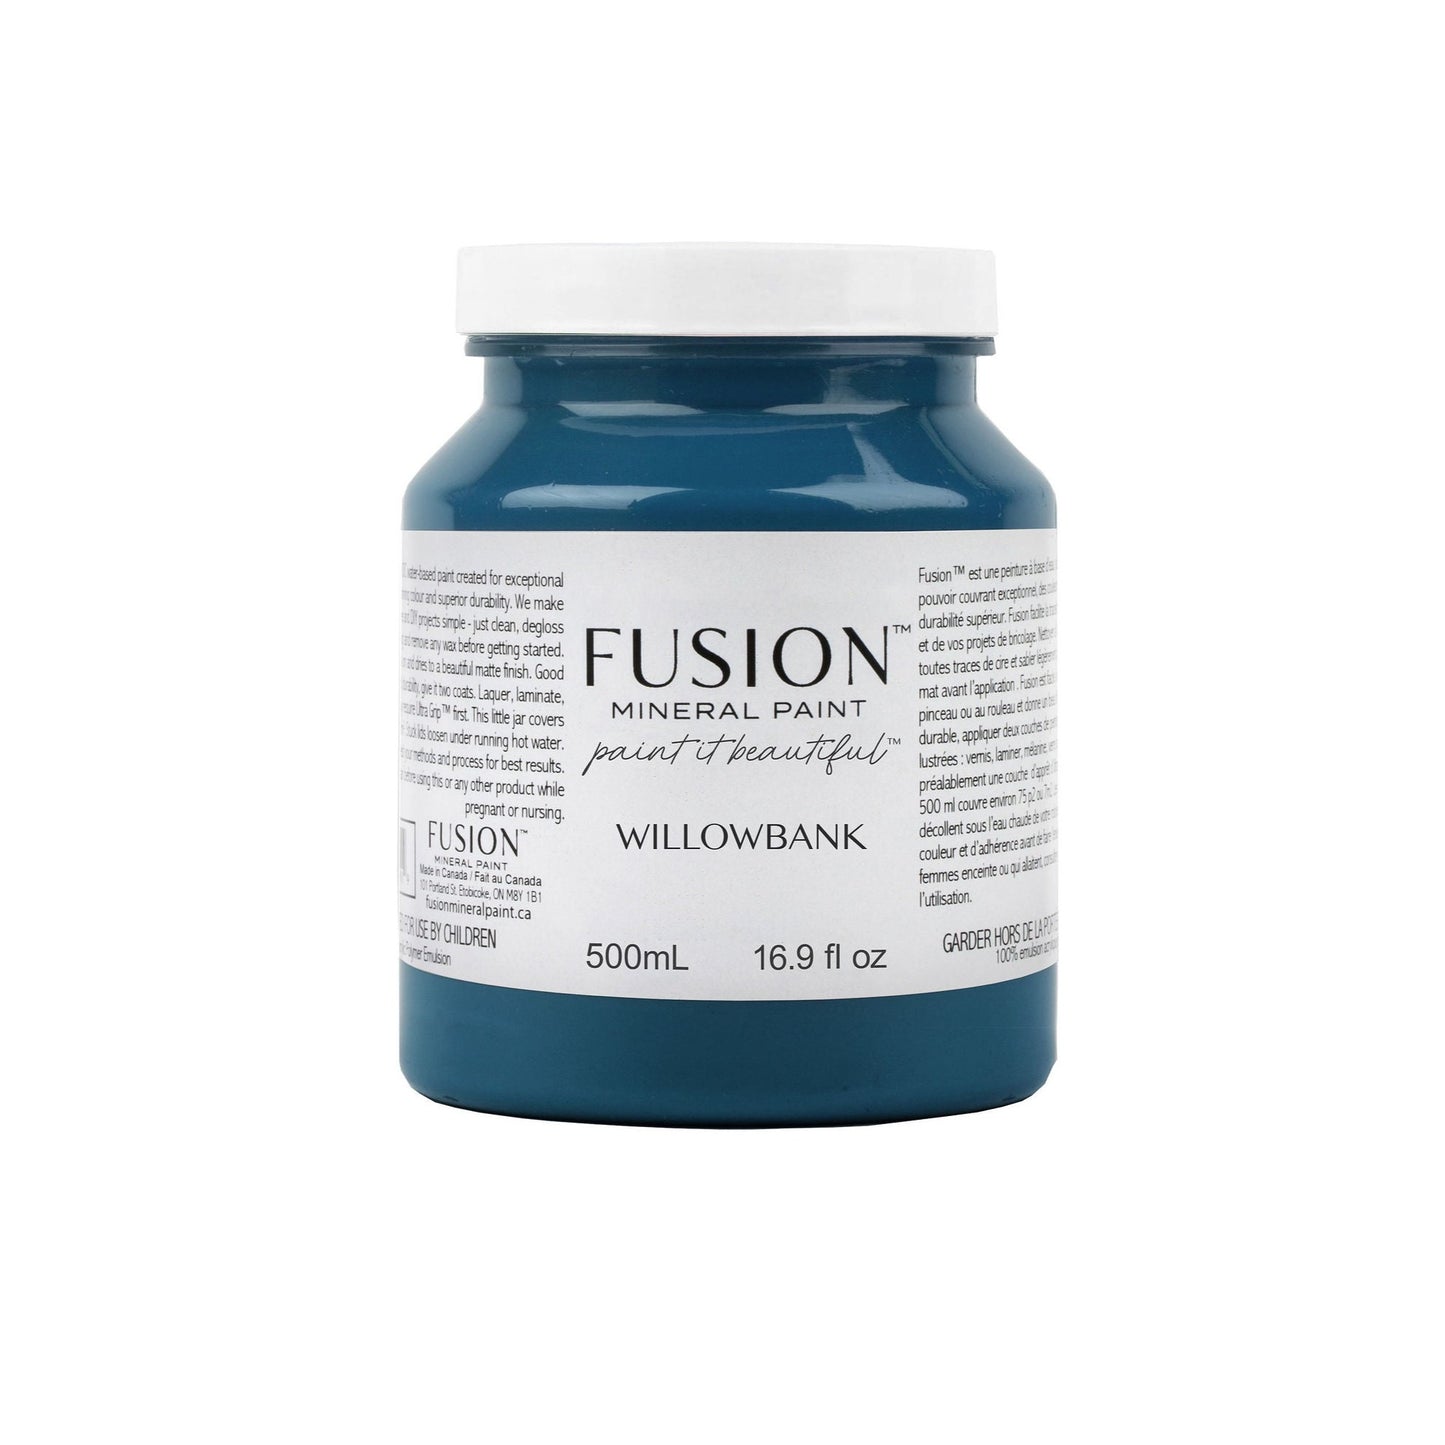 Fusion Mineral Paint WILLOWBANK